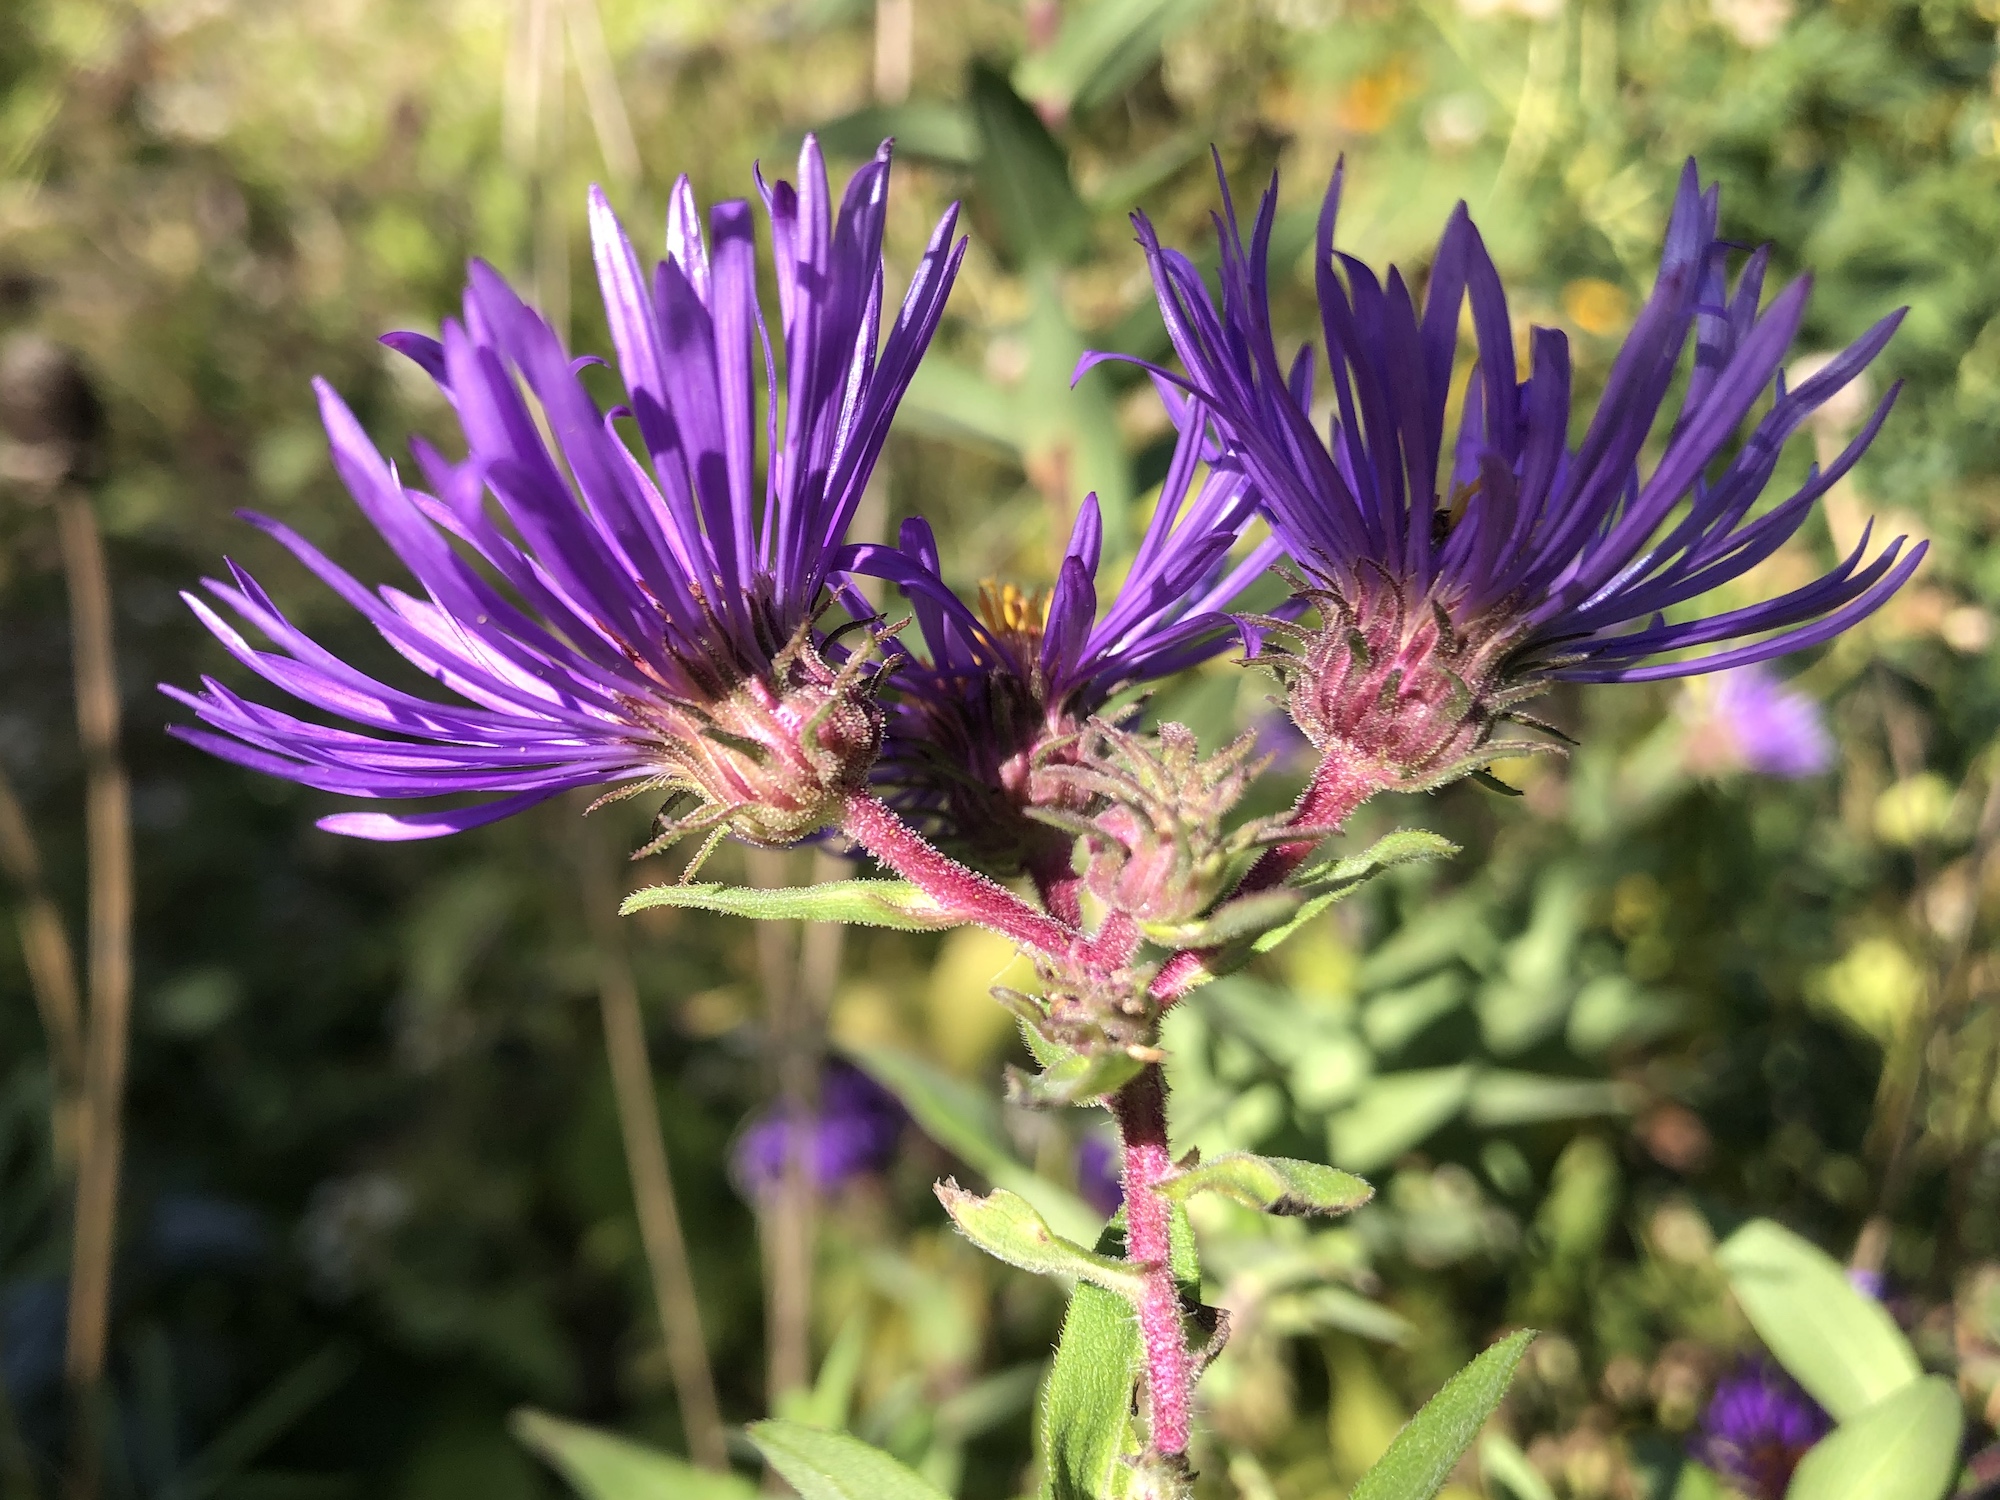 New England Aster bracts in Madison, Wisconsin on September 22, 2022.